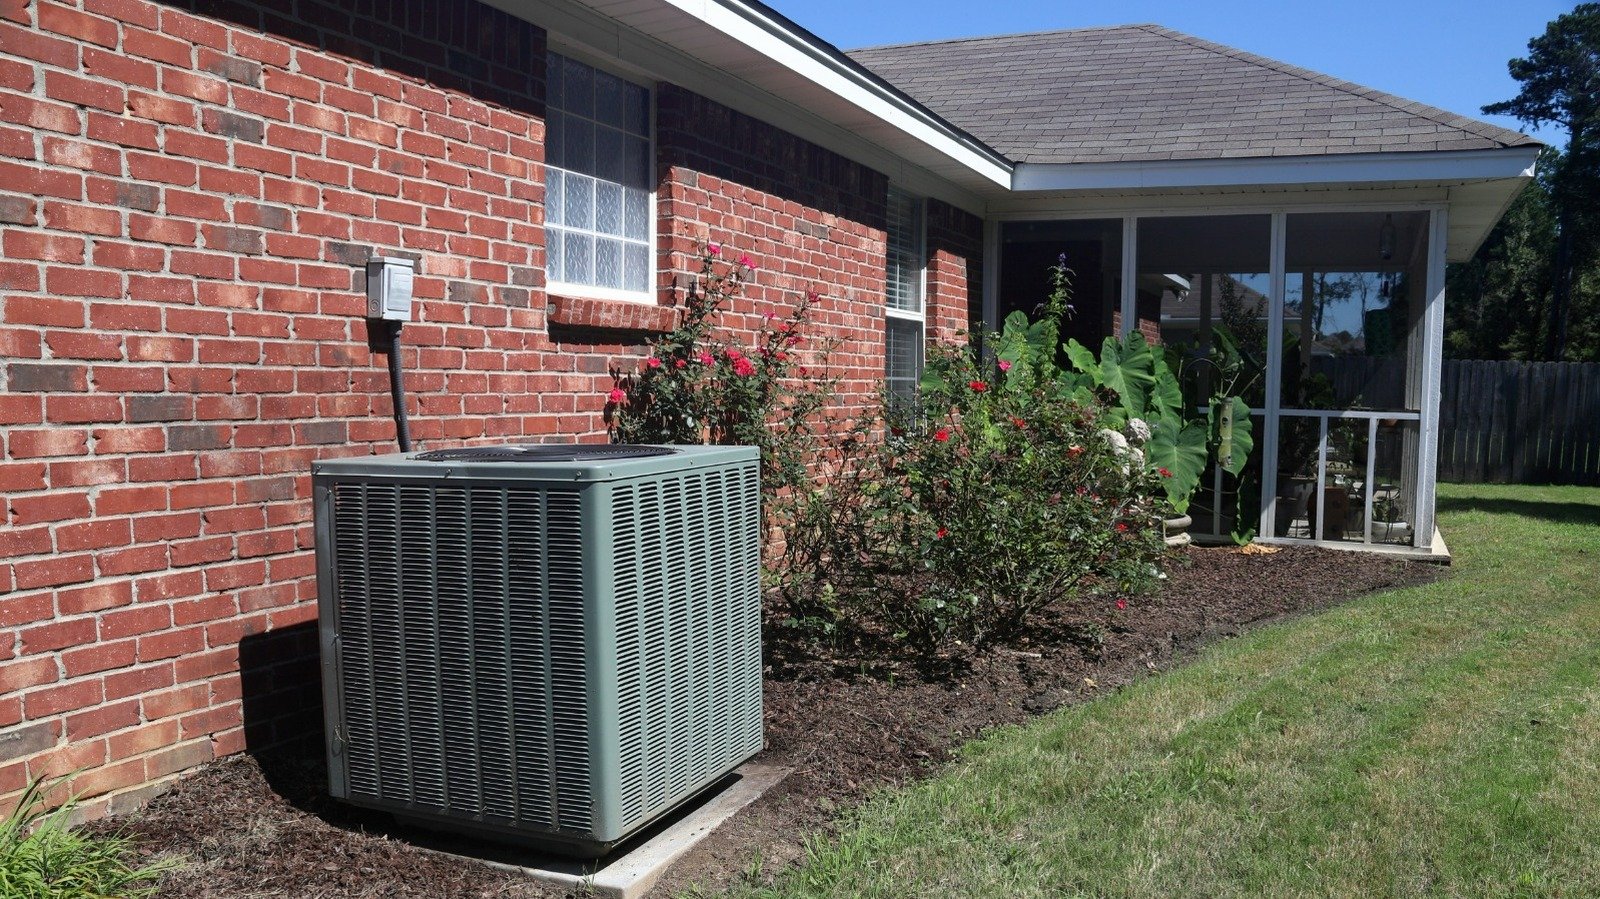 5 Creative Ways To Conceal An Air Conditioning Unit Outside - House Digest